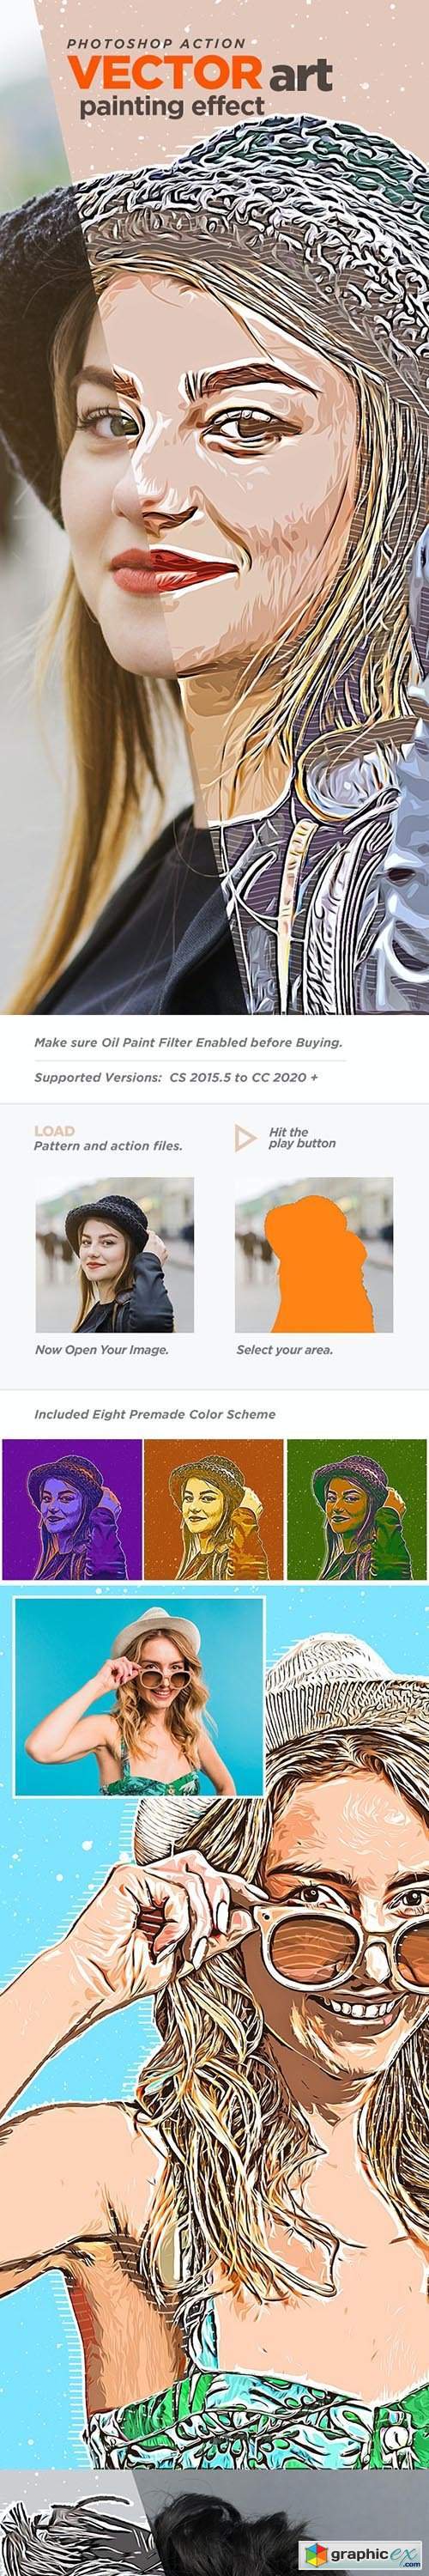 Vector Art Painting Effect Photoshop Action